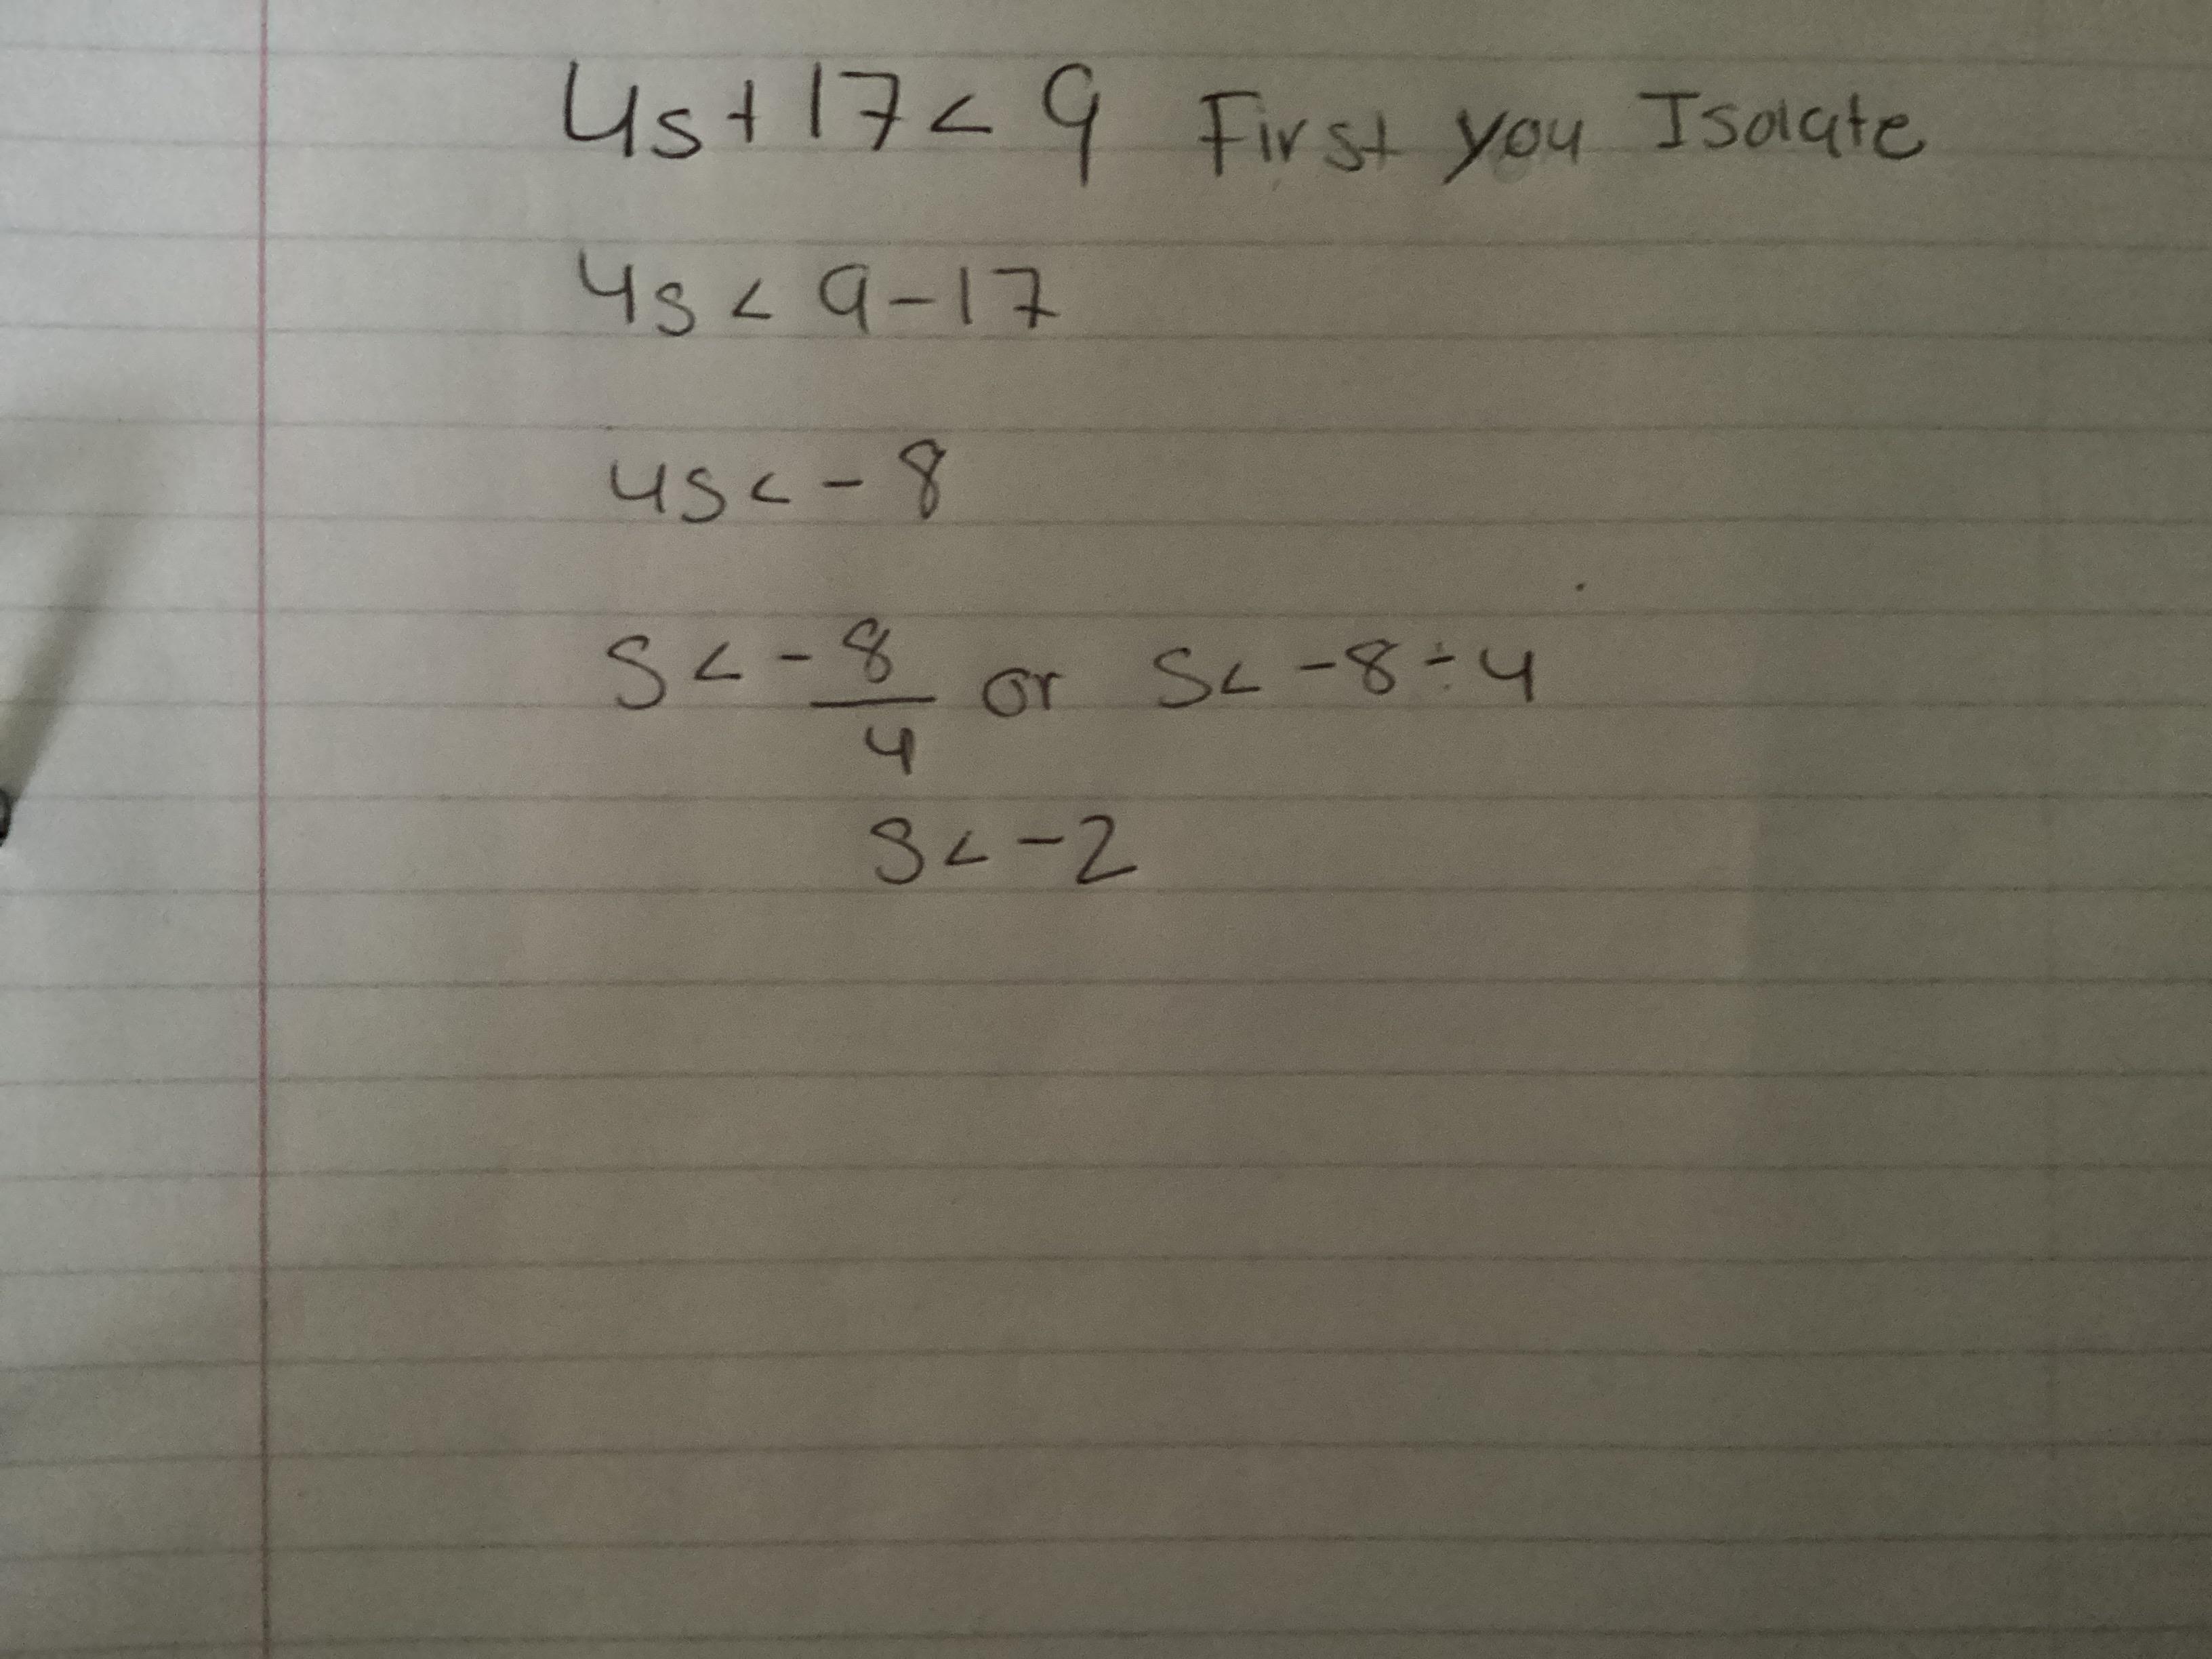 Can Yall Help Me With This 4s+17&lt;9